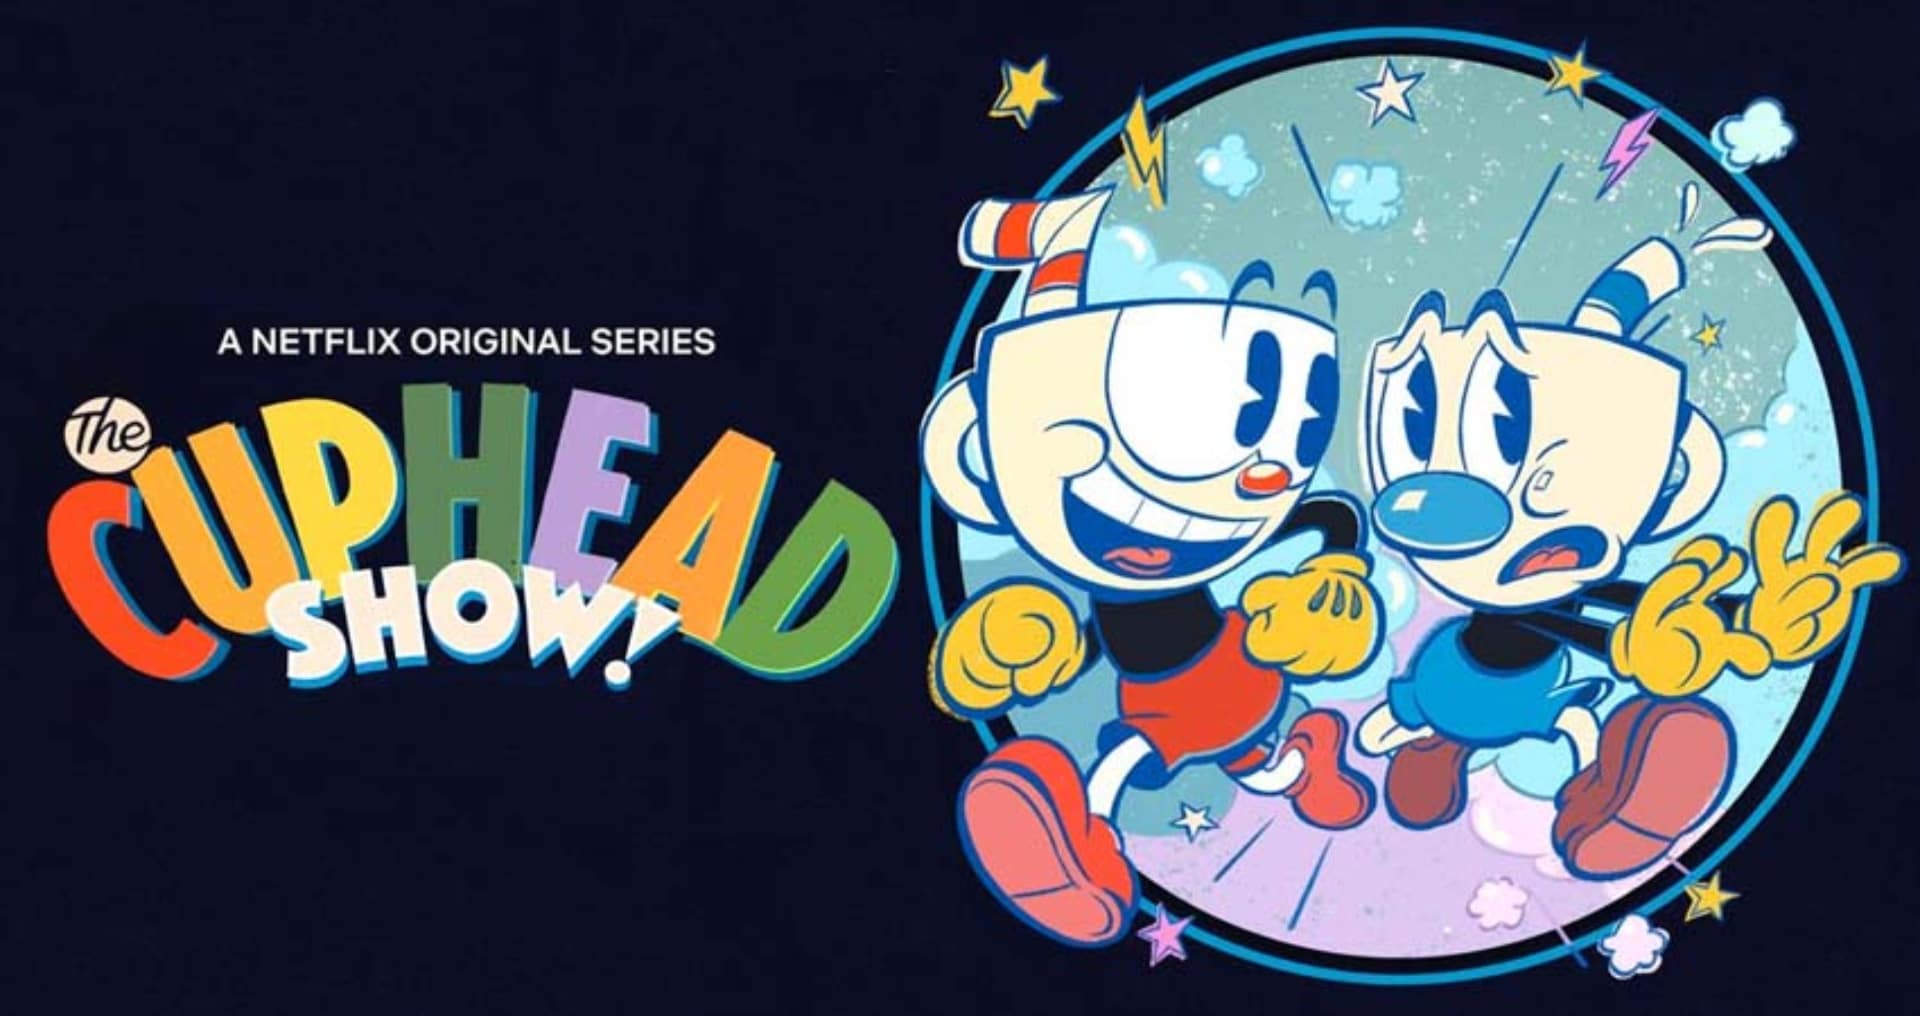 The-cuphead-show-Poster-GamersRD (1)